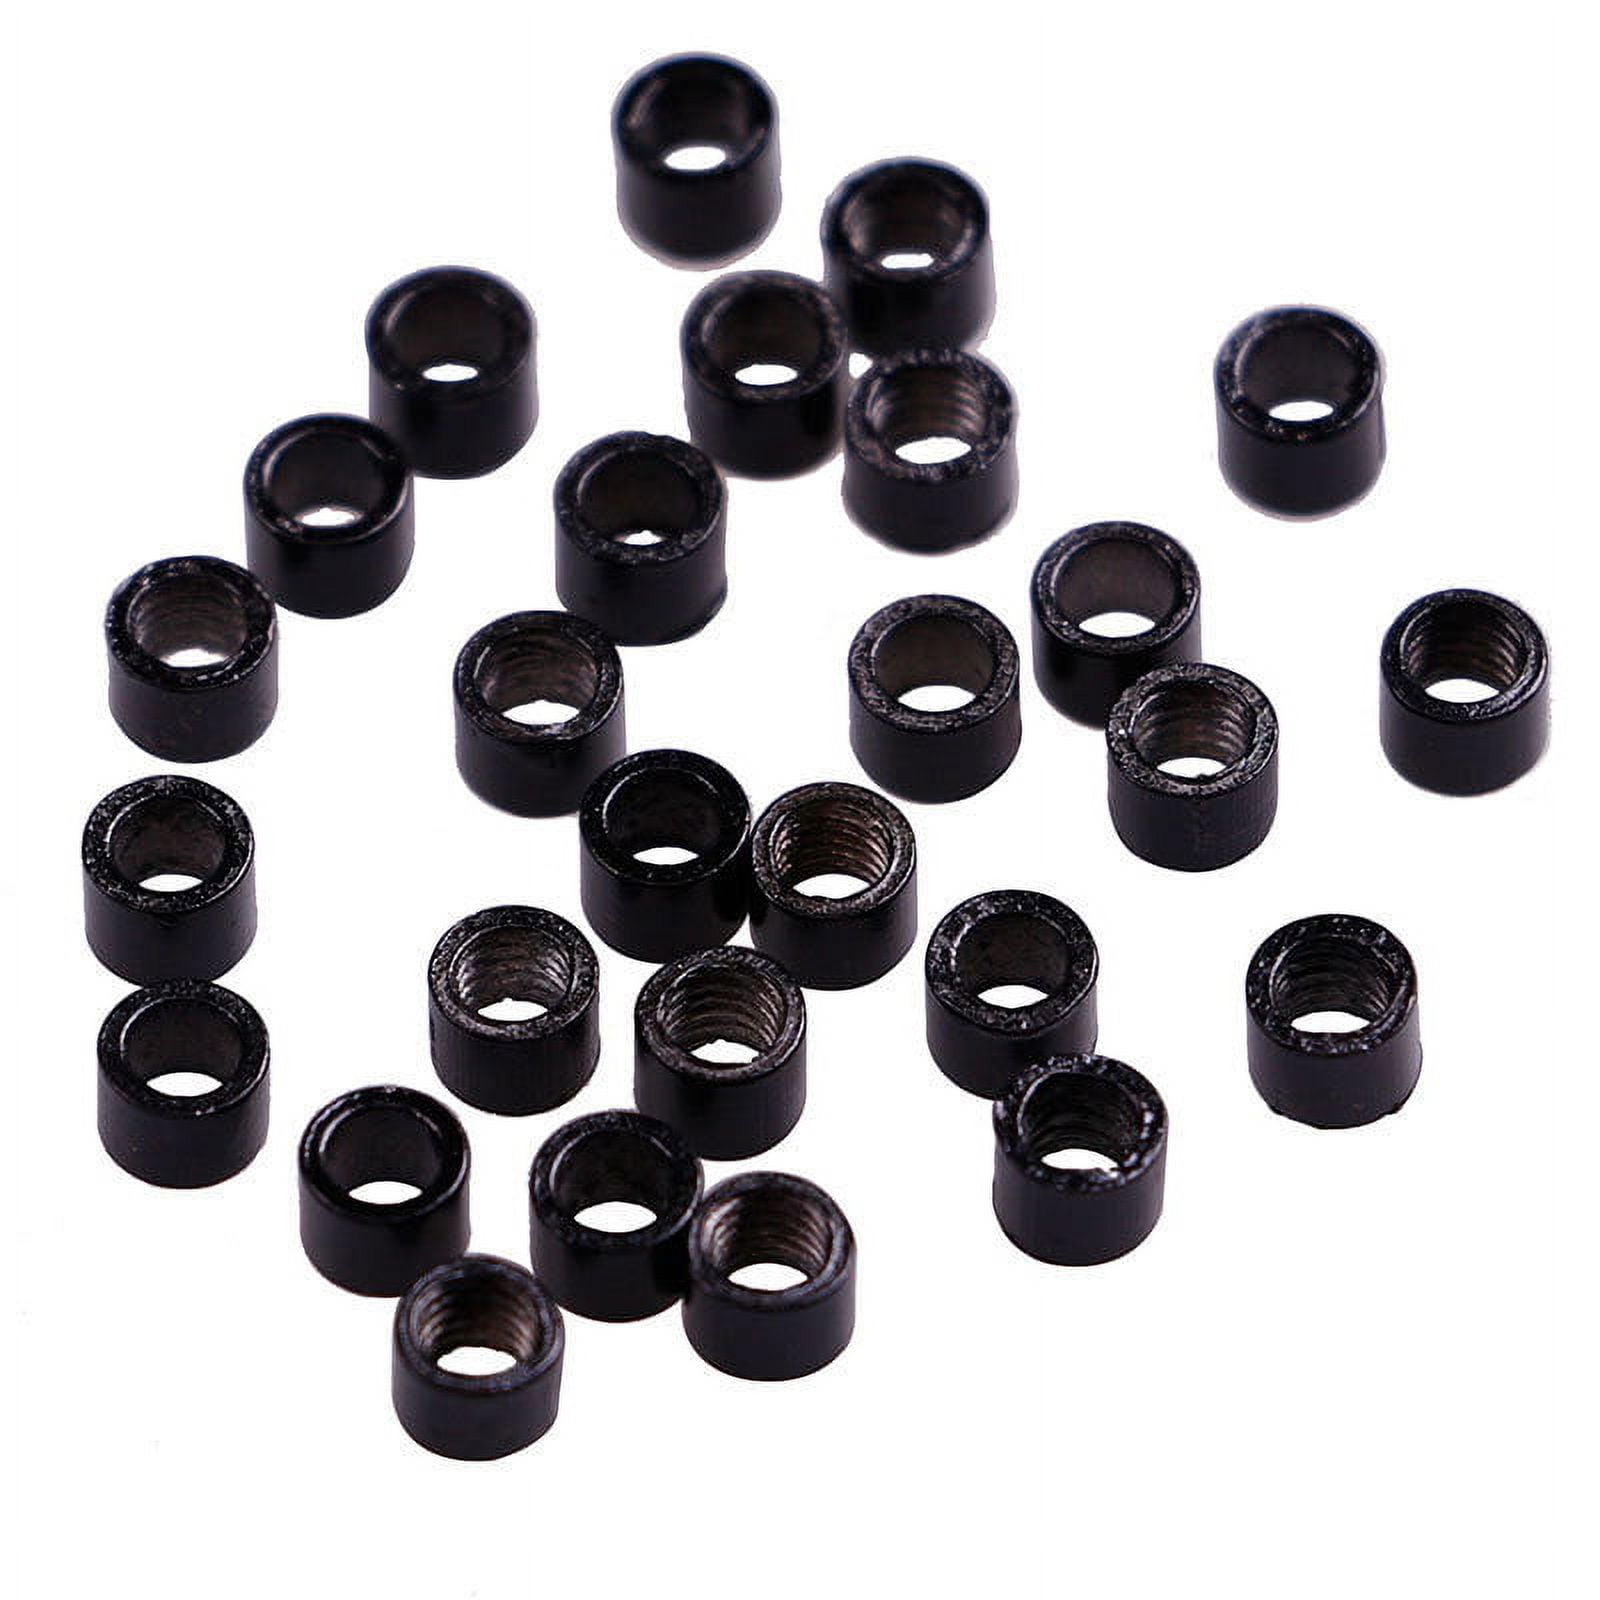  Silicone Hair Extensions 500pcs Micro Link Beads 5mm for Hair  Extensions - Silicone Lined Beads for Human Micro Link Rings Hair  Extensions Tool(Brown) : Beauty & Personal Care